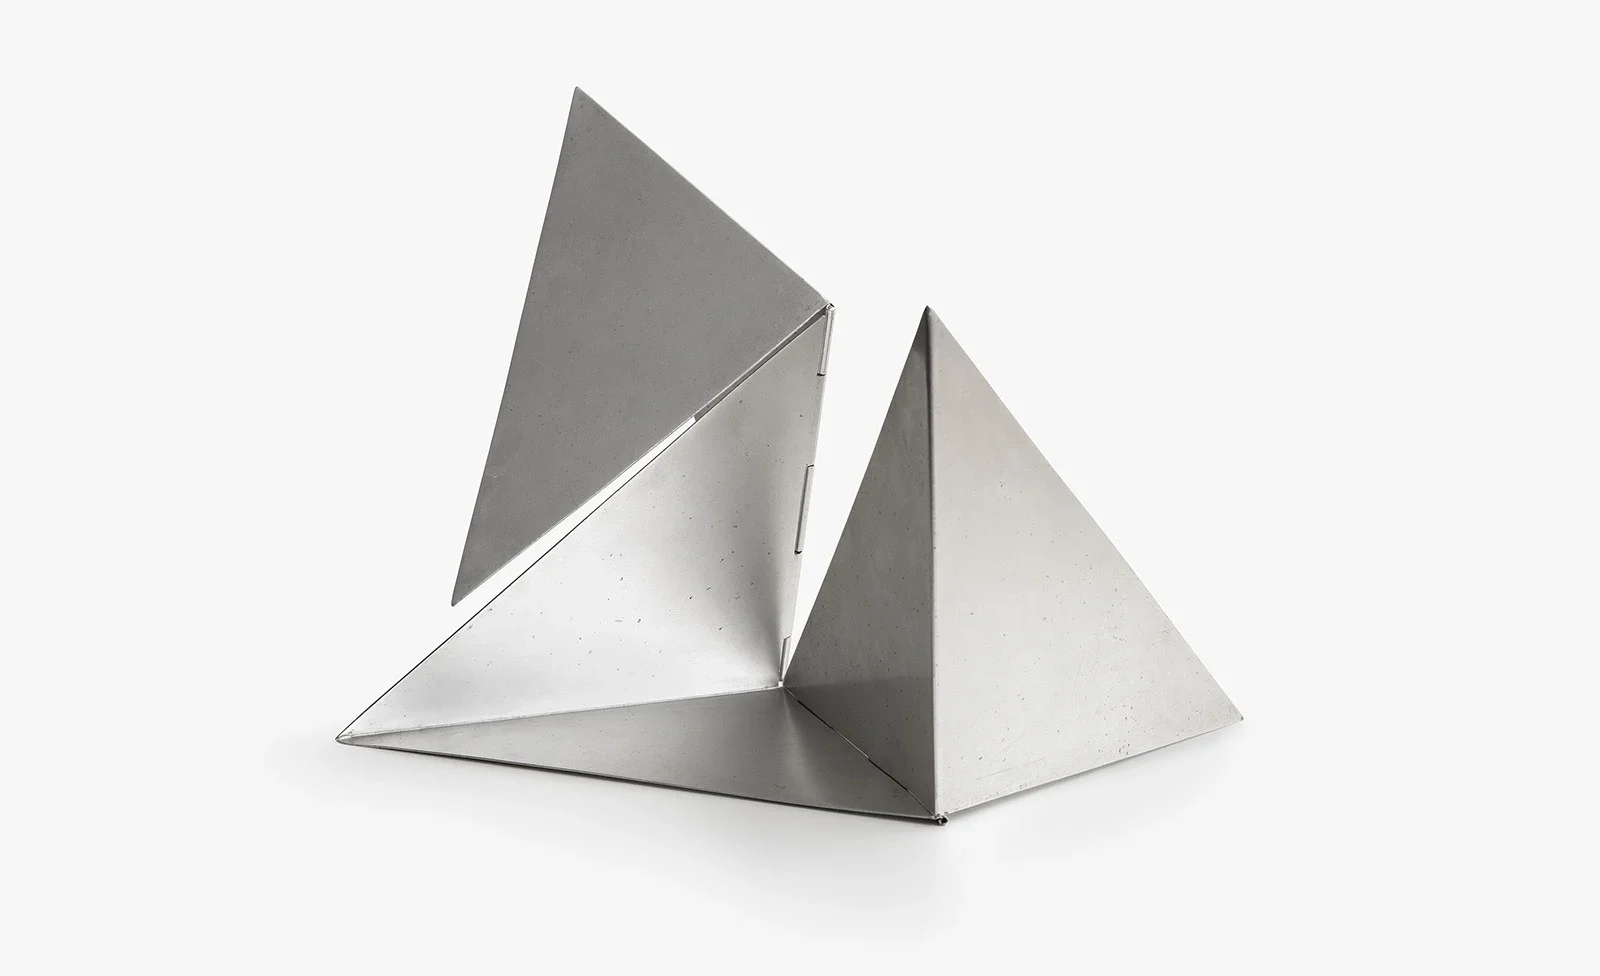 image or photo about Lygia Clark